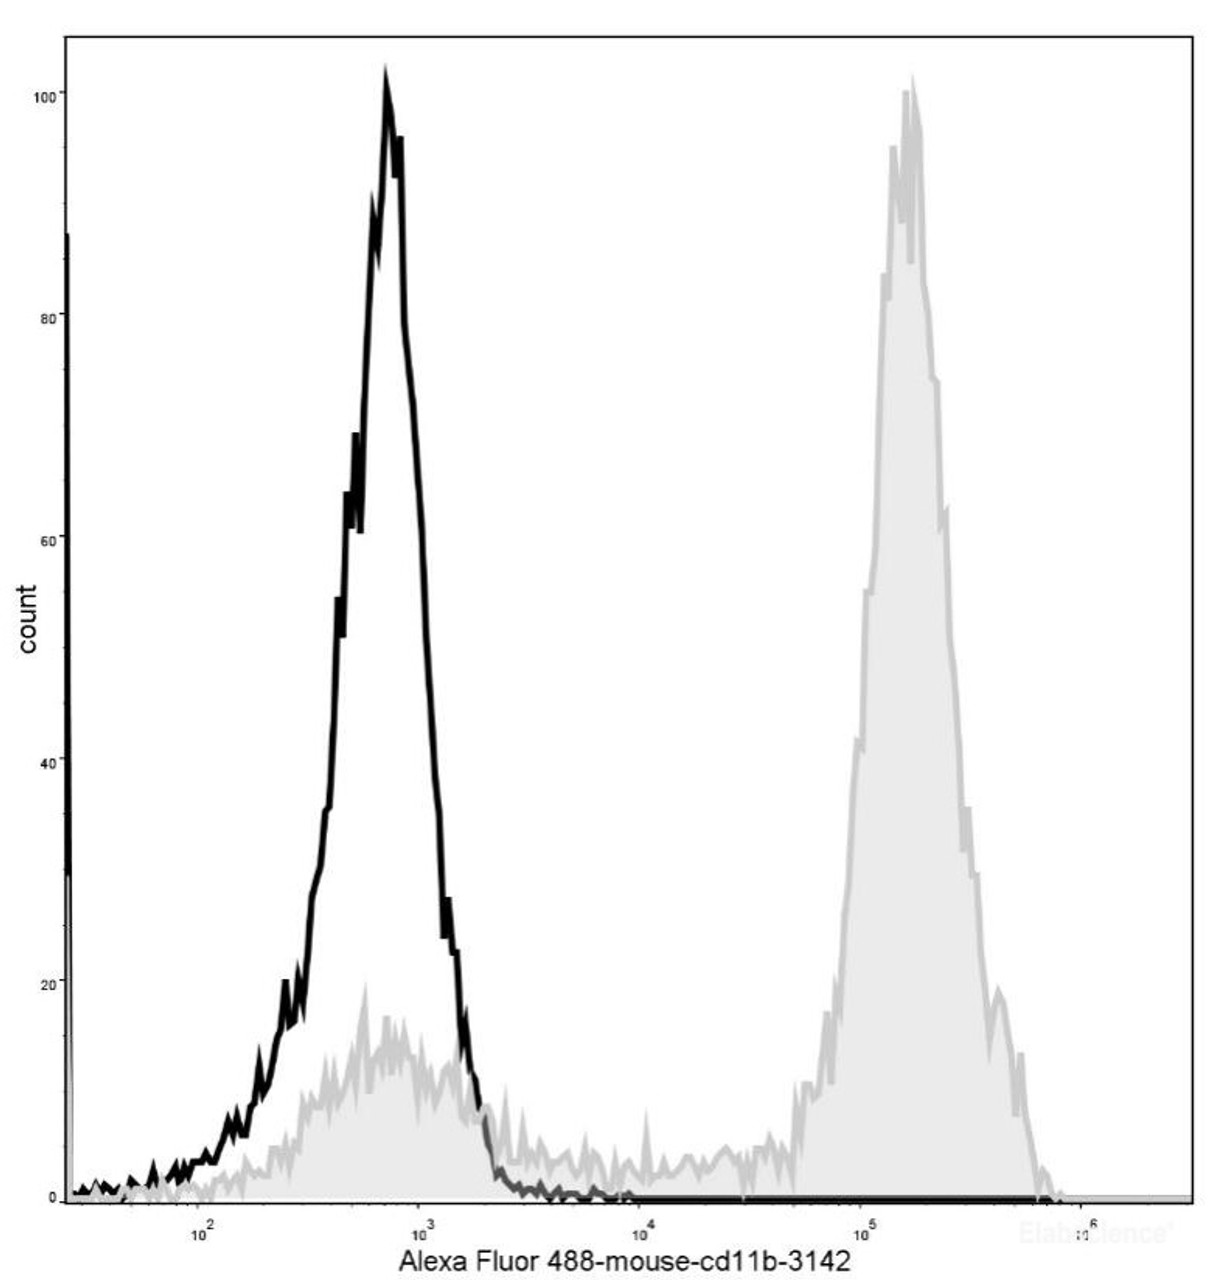 Mouse bone marrow cells are stained with AF488 Anti-Mouse/Human CD11b Antibody[Used at .2 μg/1<sup>6</sup> cells dilution](filled gray histogram). Unstained bone marrow cells (blank black histogram) are used as control.